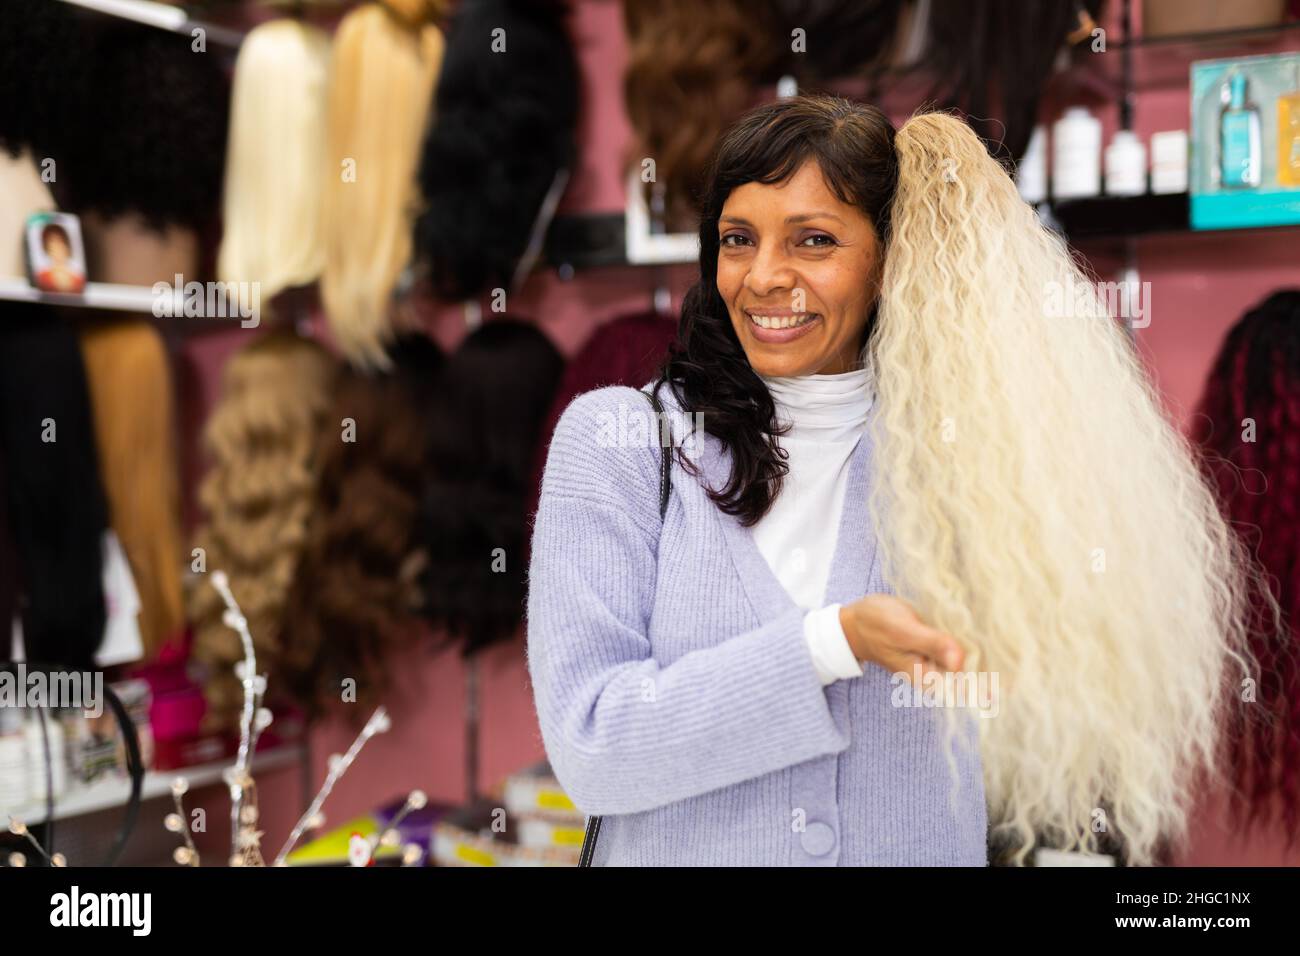 Woman choosing natural wig at specialty boutique Stock Photo